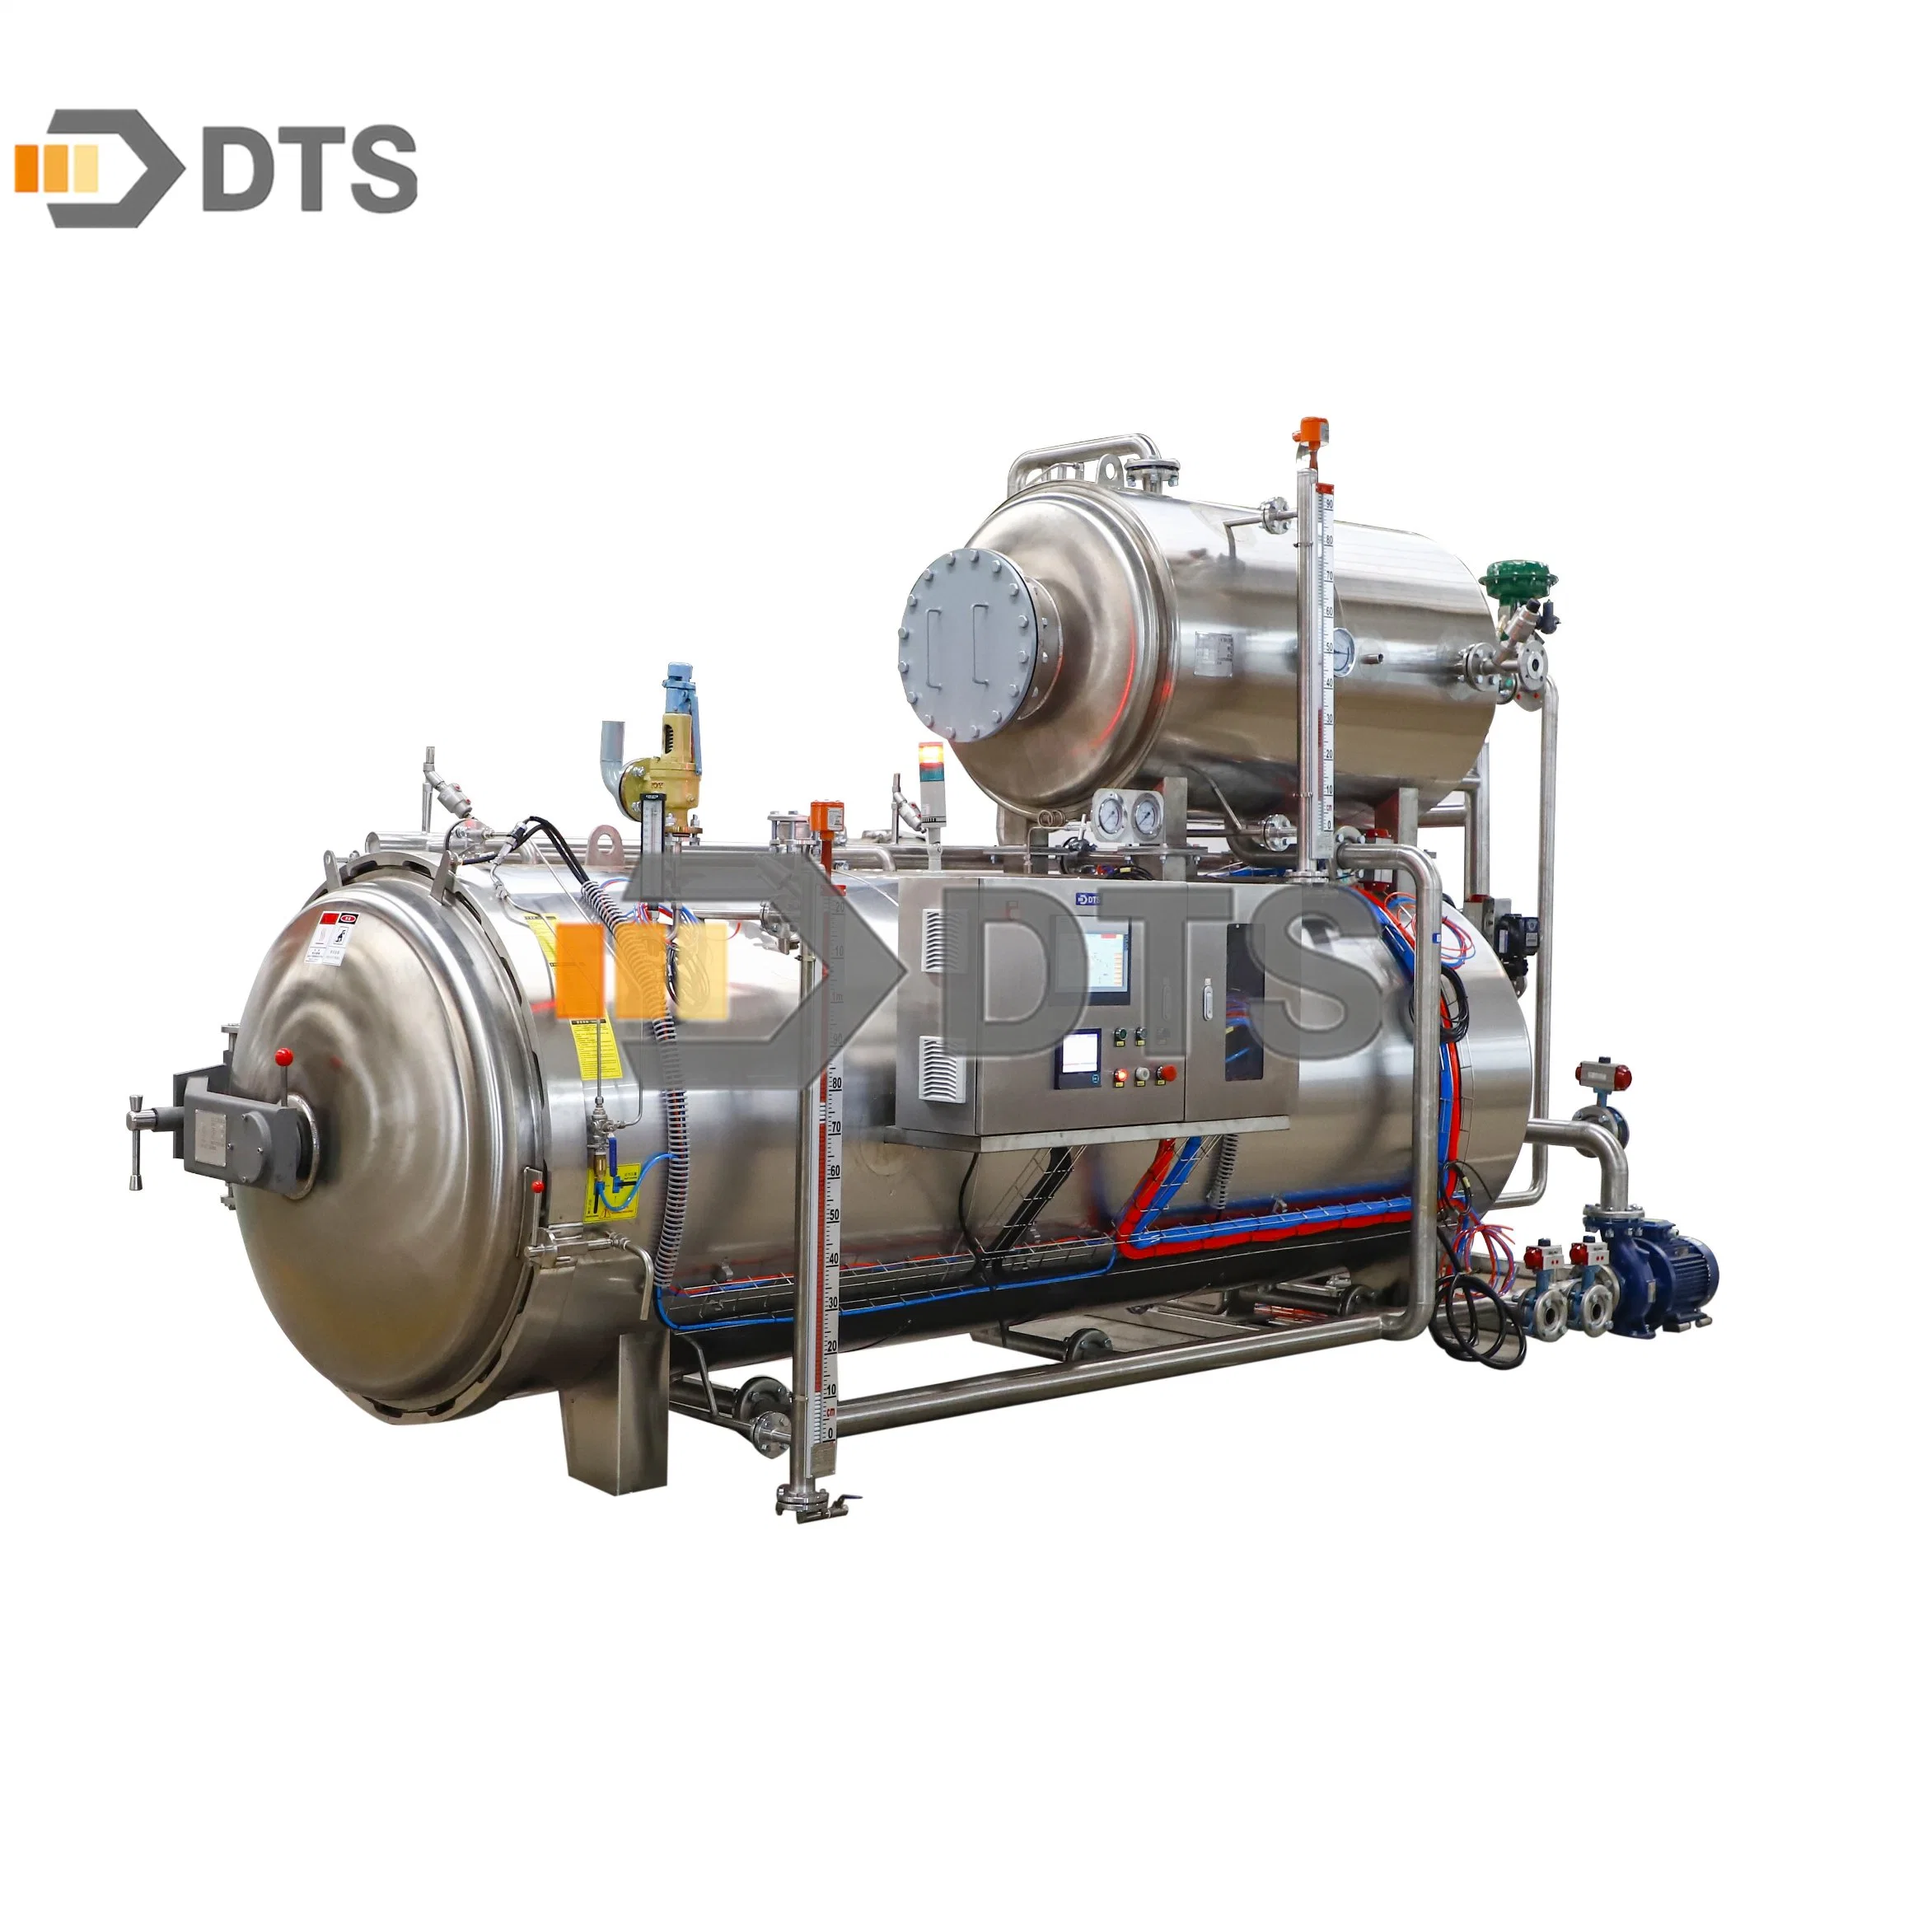 Excellent Dts Water Spray Retort/Sterilizer for Foods and Beverages in Pouch